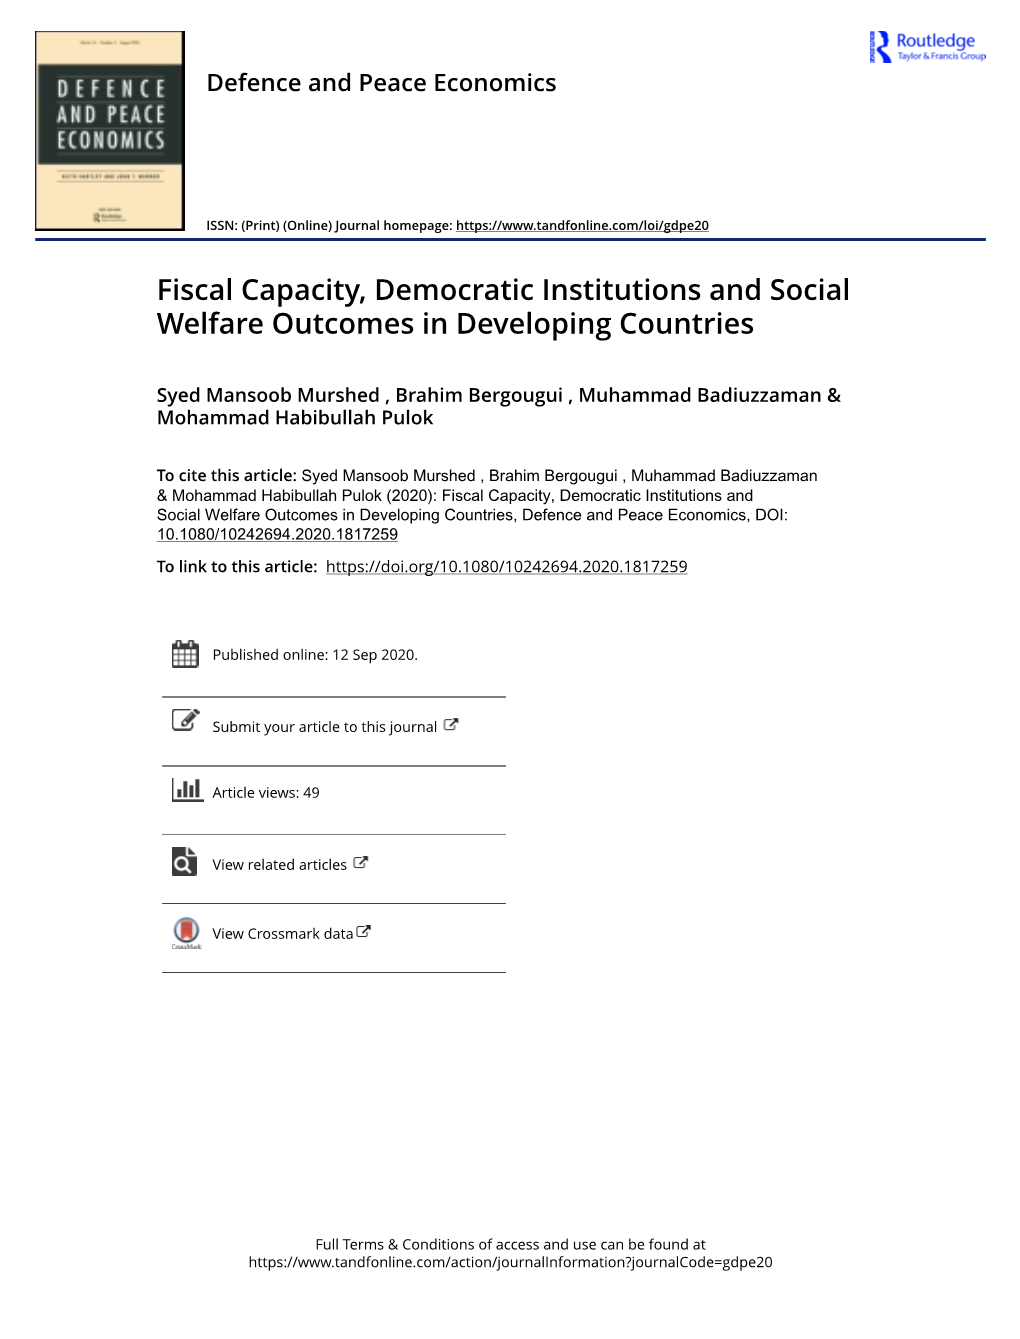 Fiscal Capacity, Democratic Institutions and Social Welfare Outcomes in Developing Countries